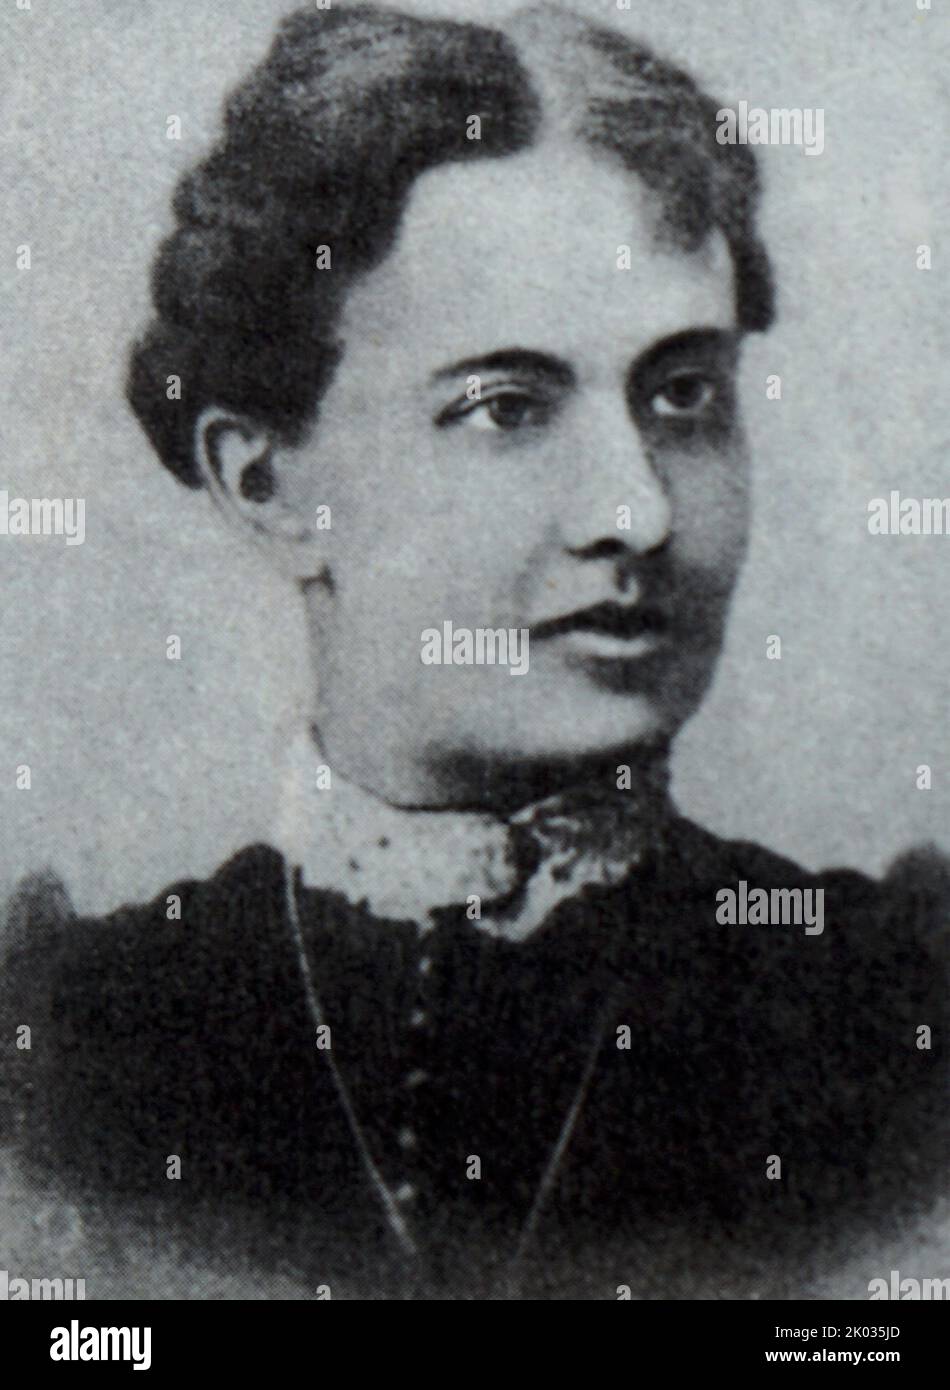 Sofya Vasilievna Kovalevskaya (1850 - 1891) Russian mathematician who made contributions to analysis, partial differential equations and mechanics. the first woman to obtain a doctorate (in the modern sense) in mathematics, the first woman appointed to a full professorship in Northern Europe and one of the first women to work for a scientific journal as an editor. Stock Photo